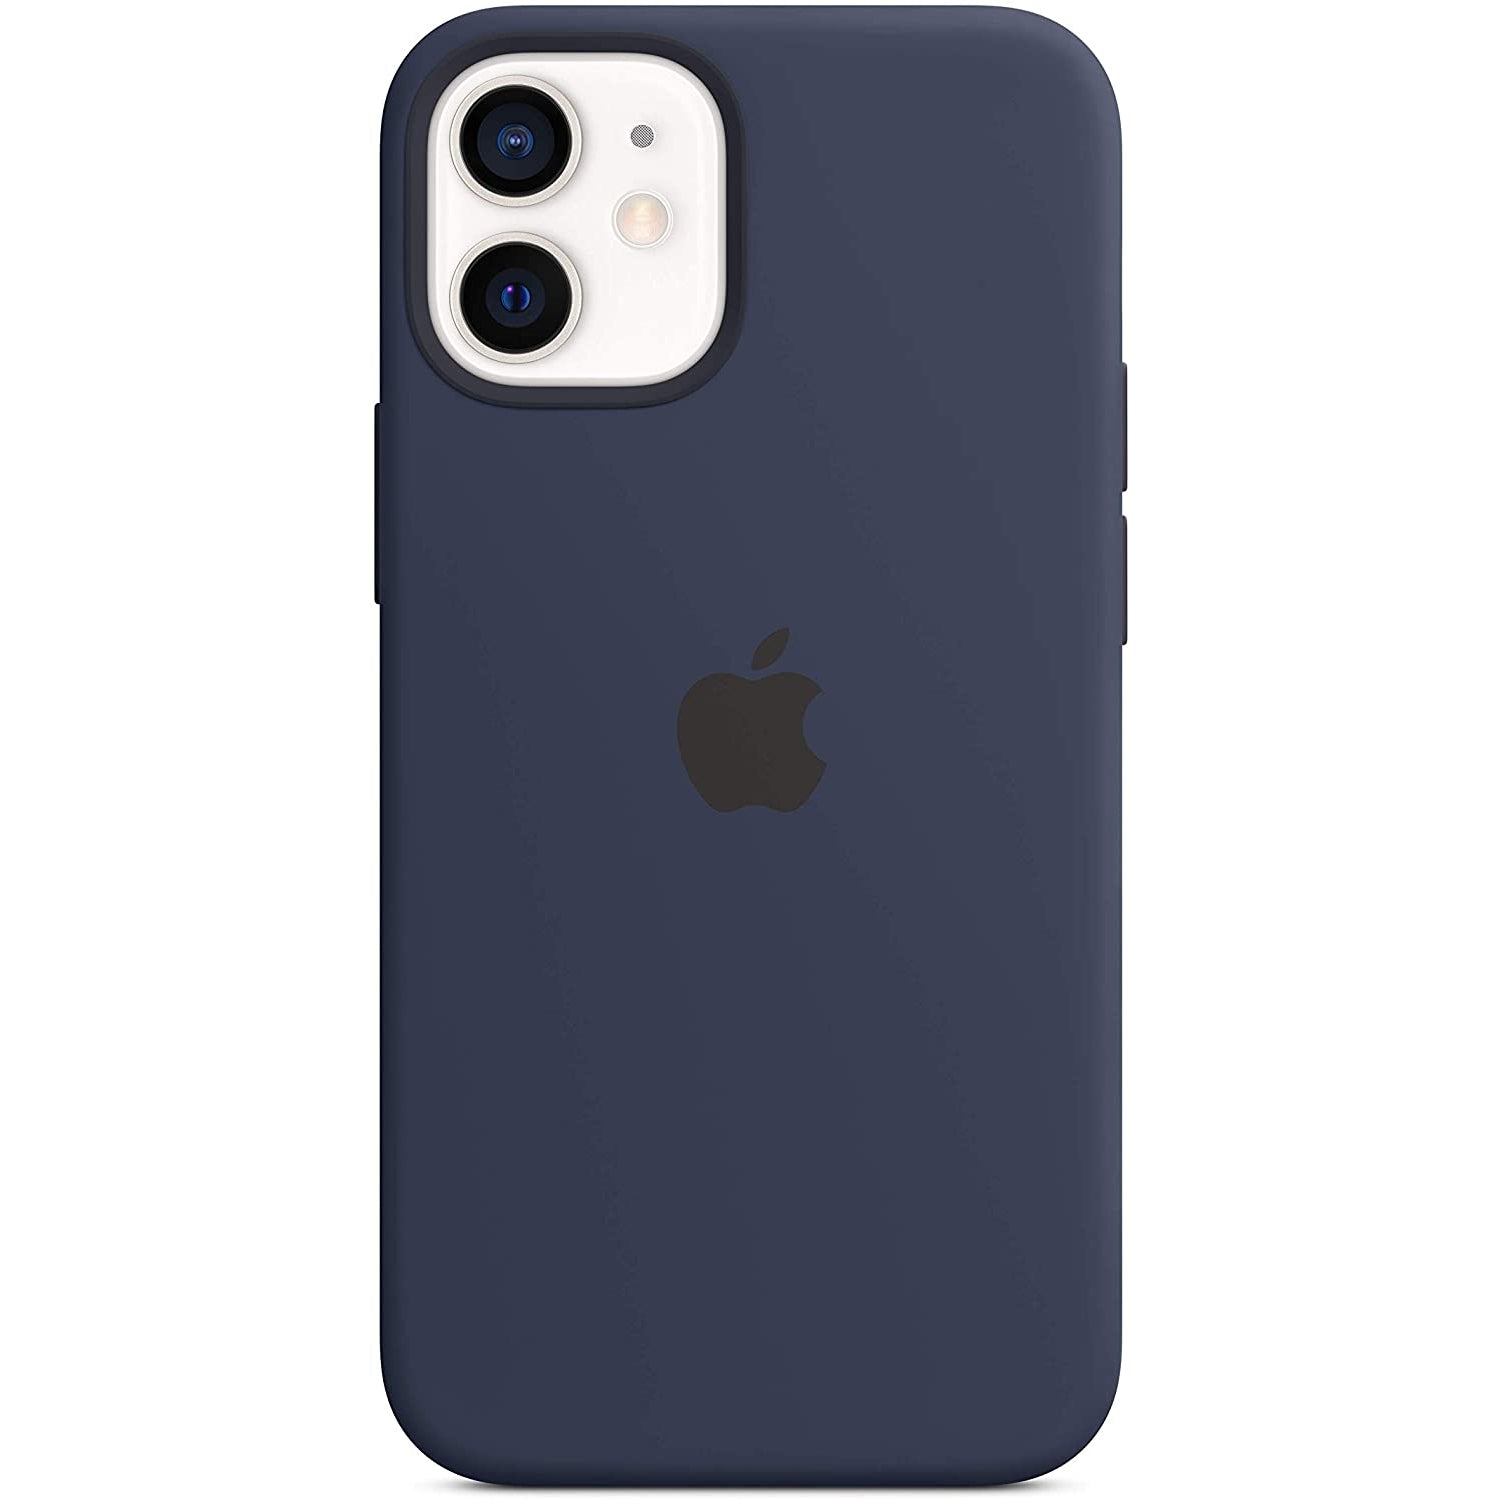 Apple Silicone Case with MagSafe for iPhone 12 mini, Deep Navy